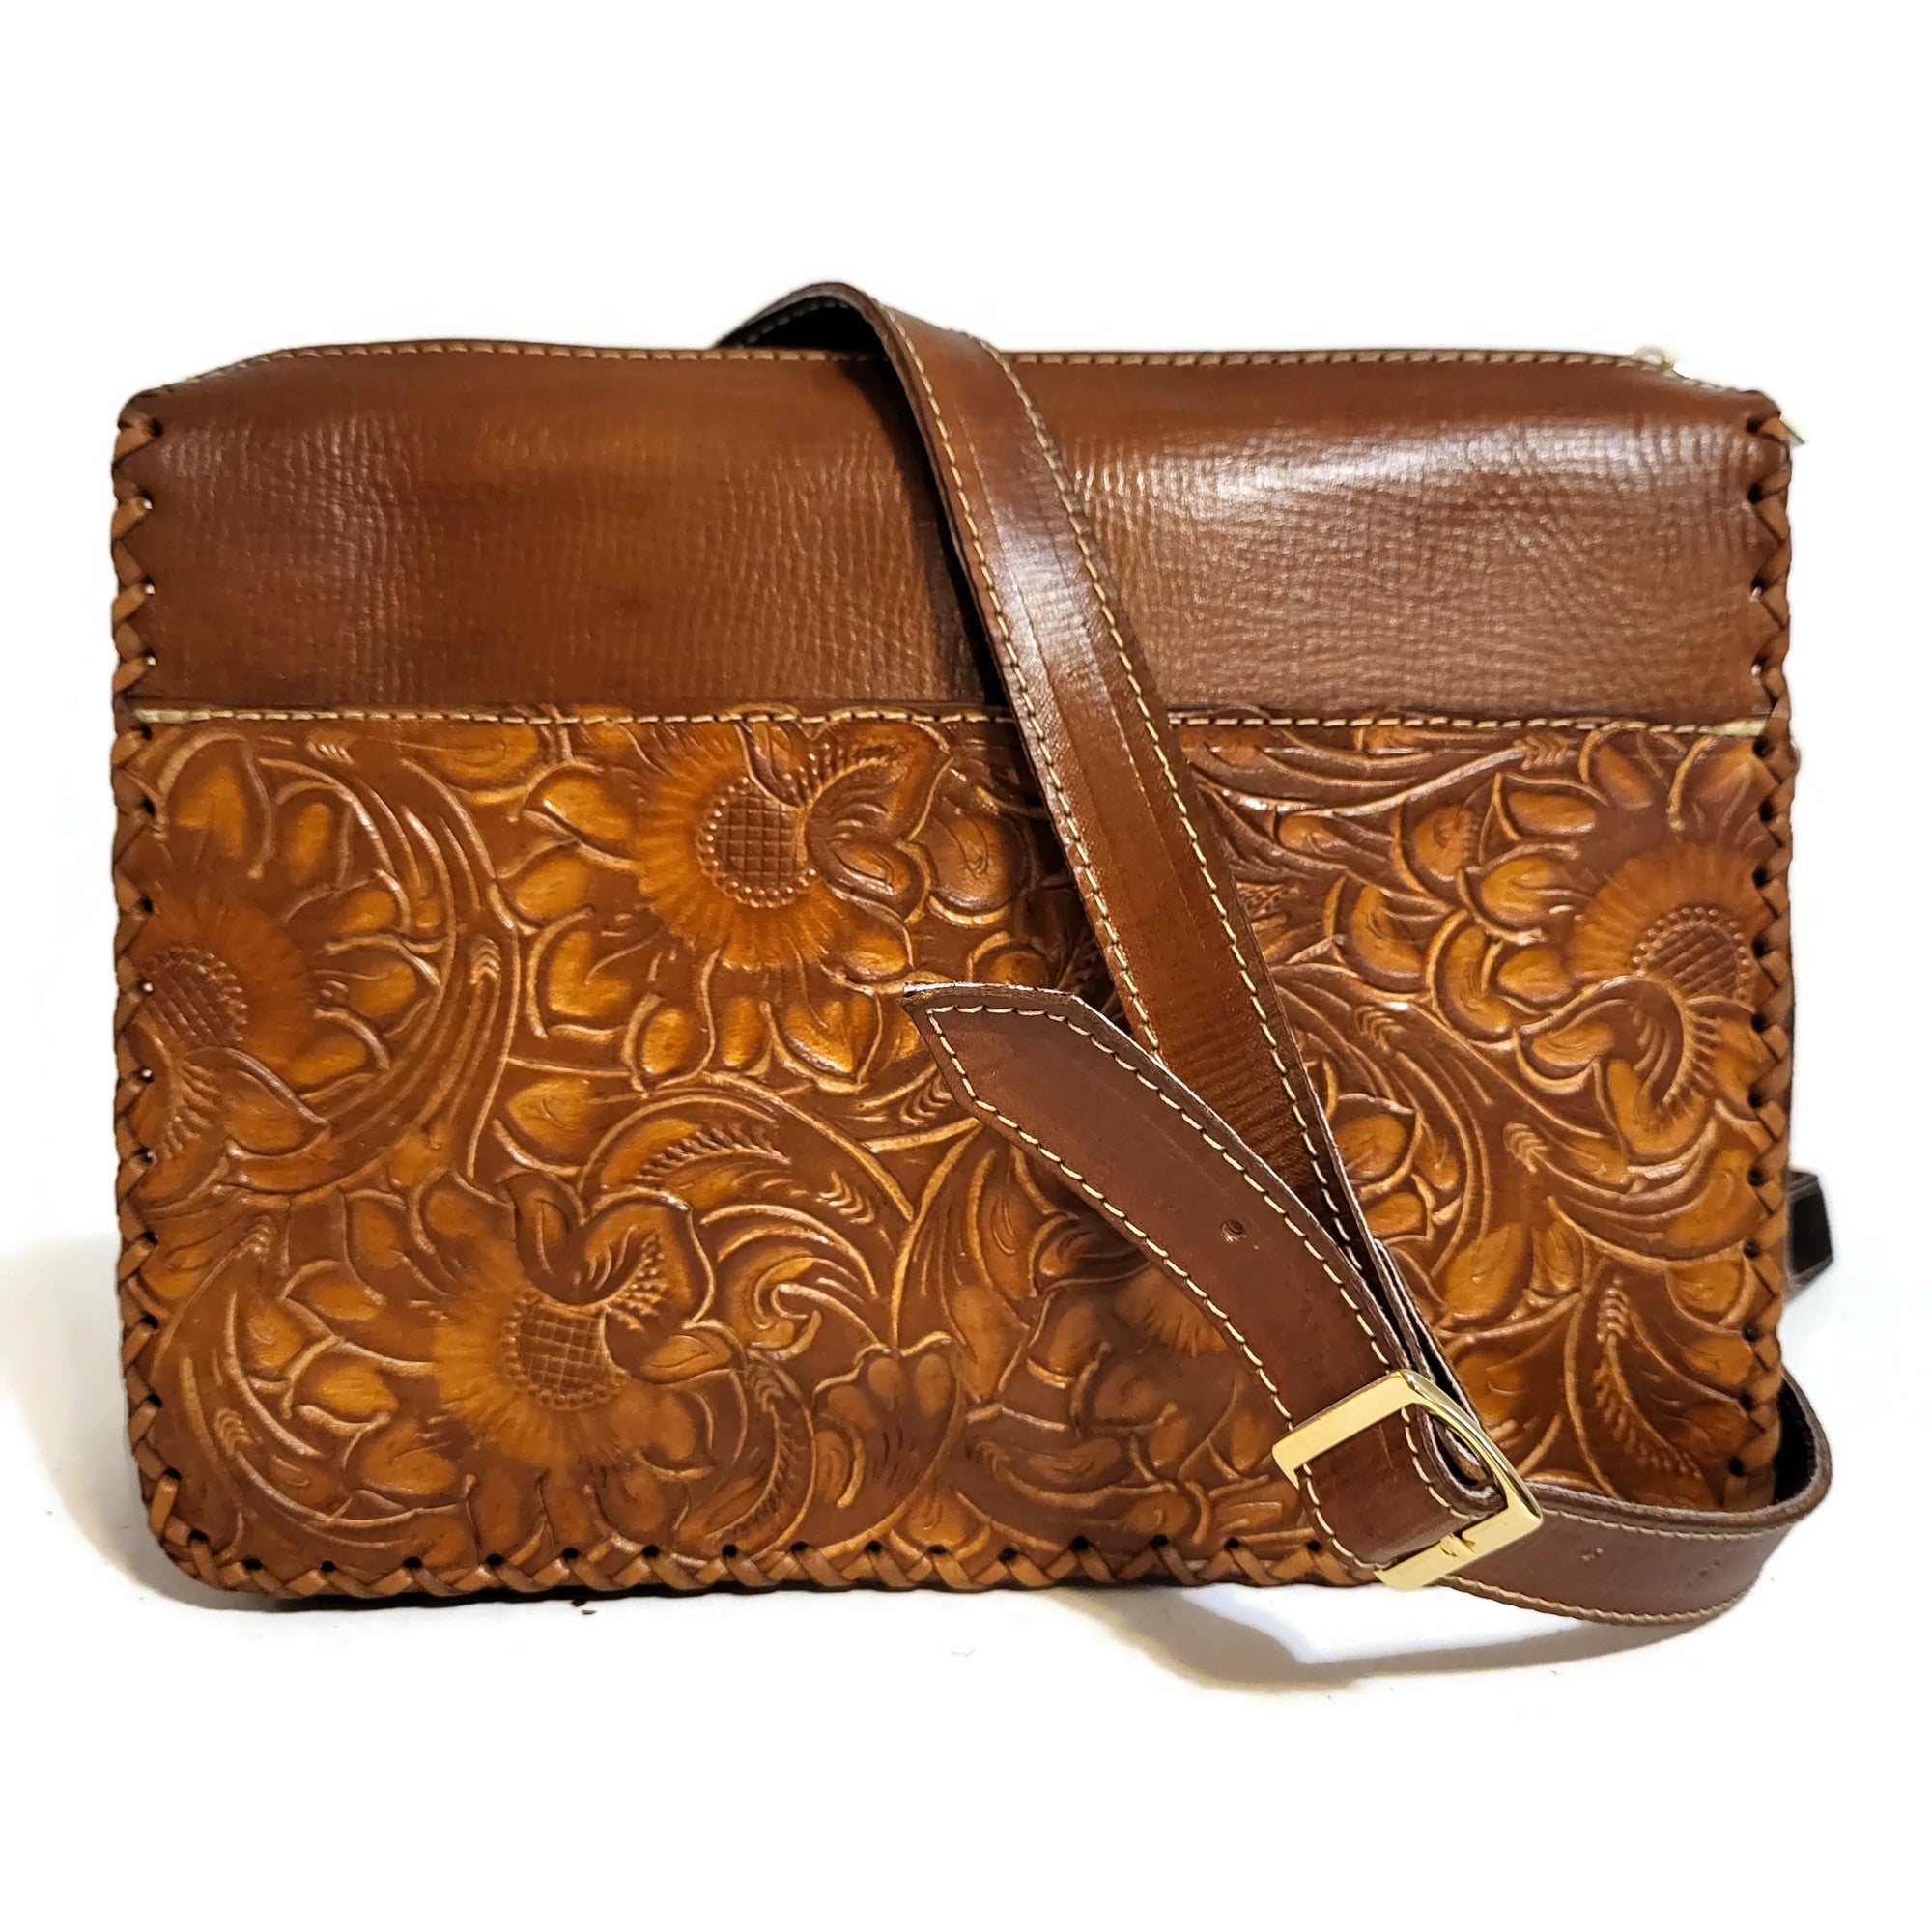 Hand tooled leather bag for women, leather women purse, shoulder bag , brown leather bag